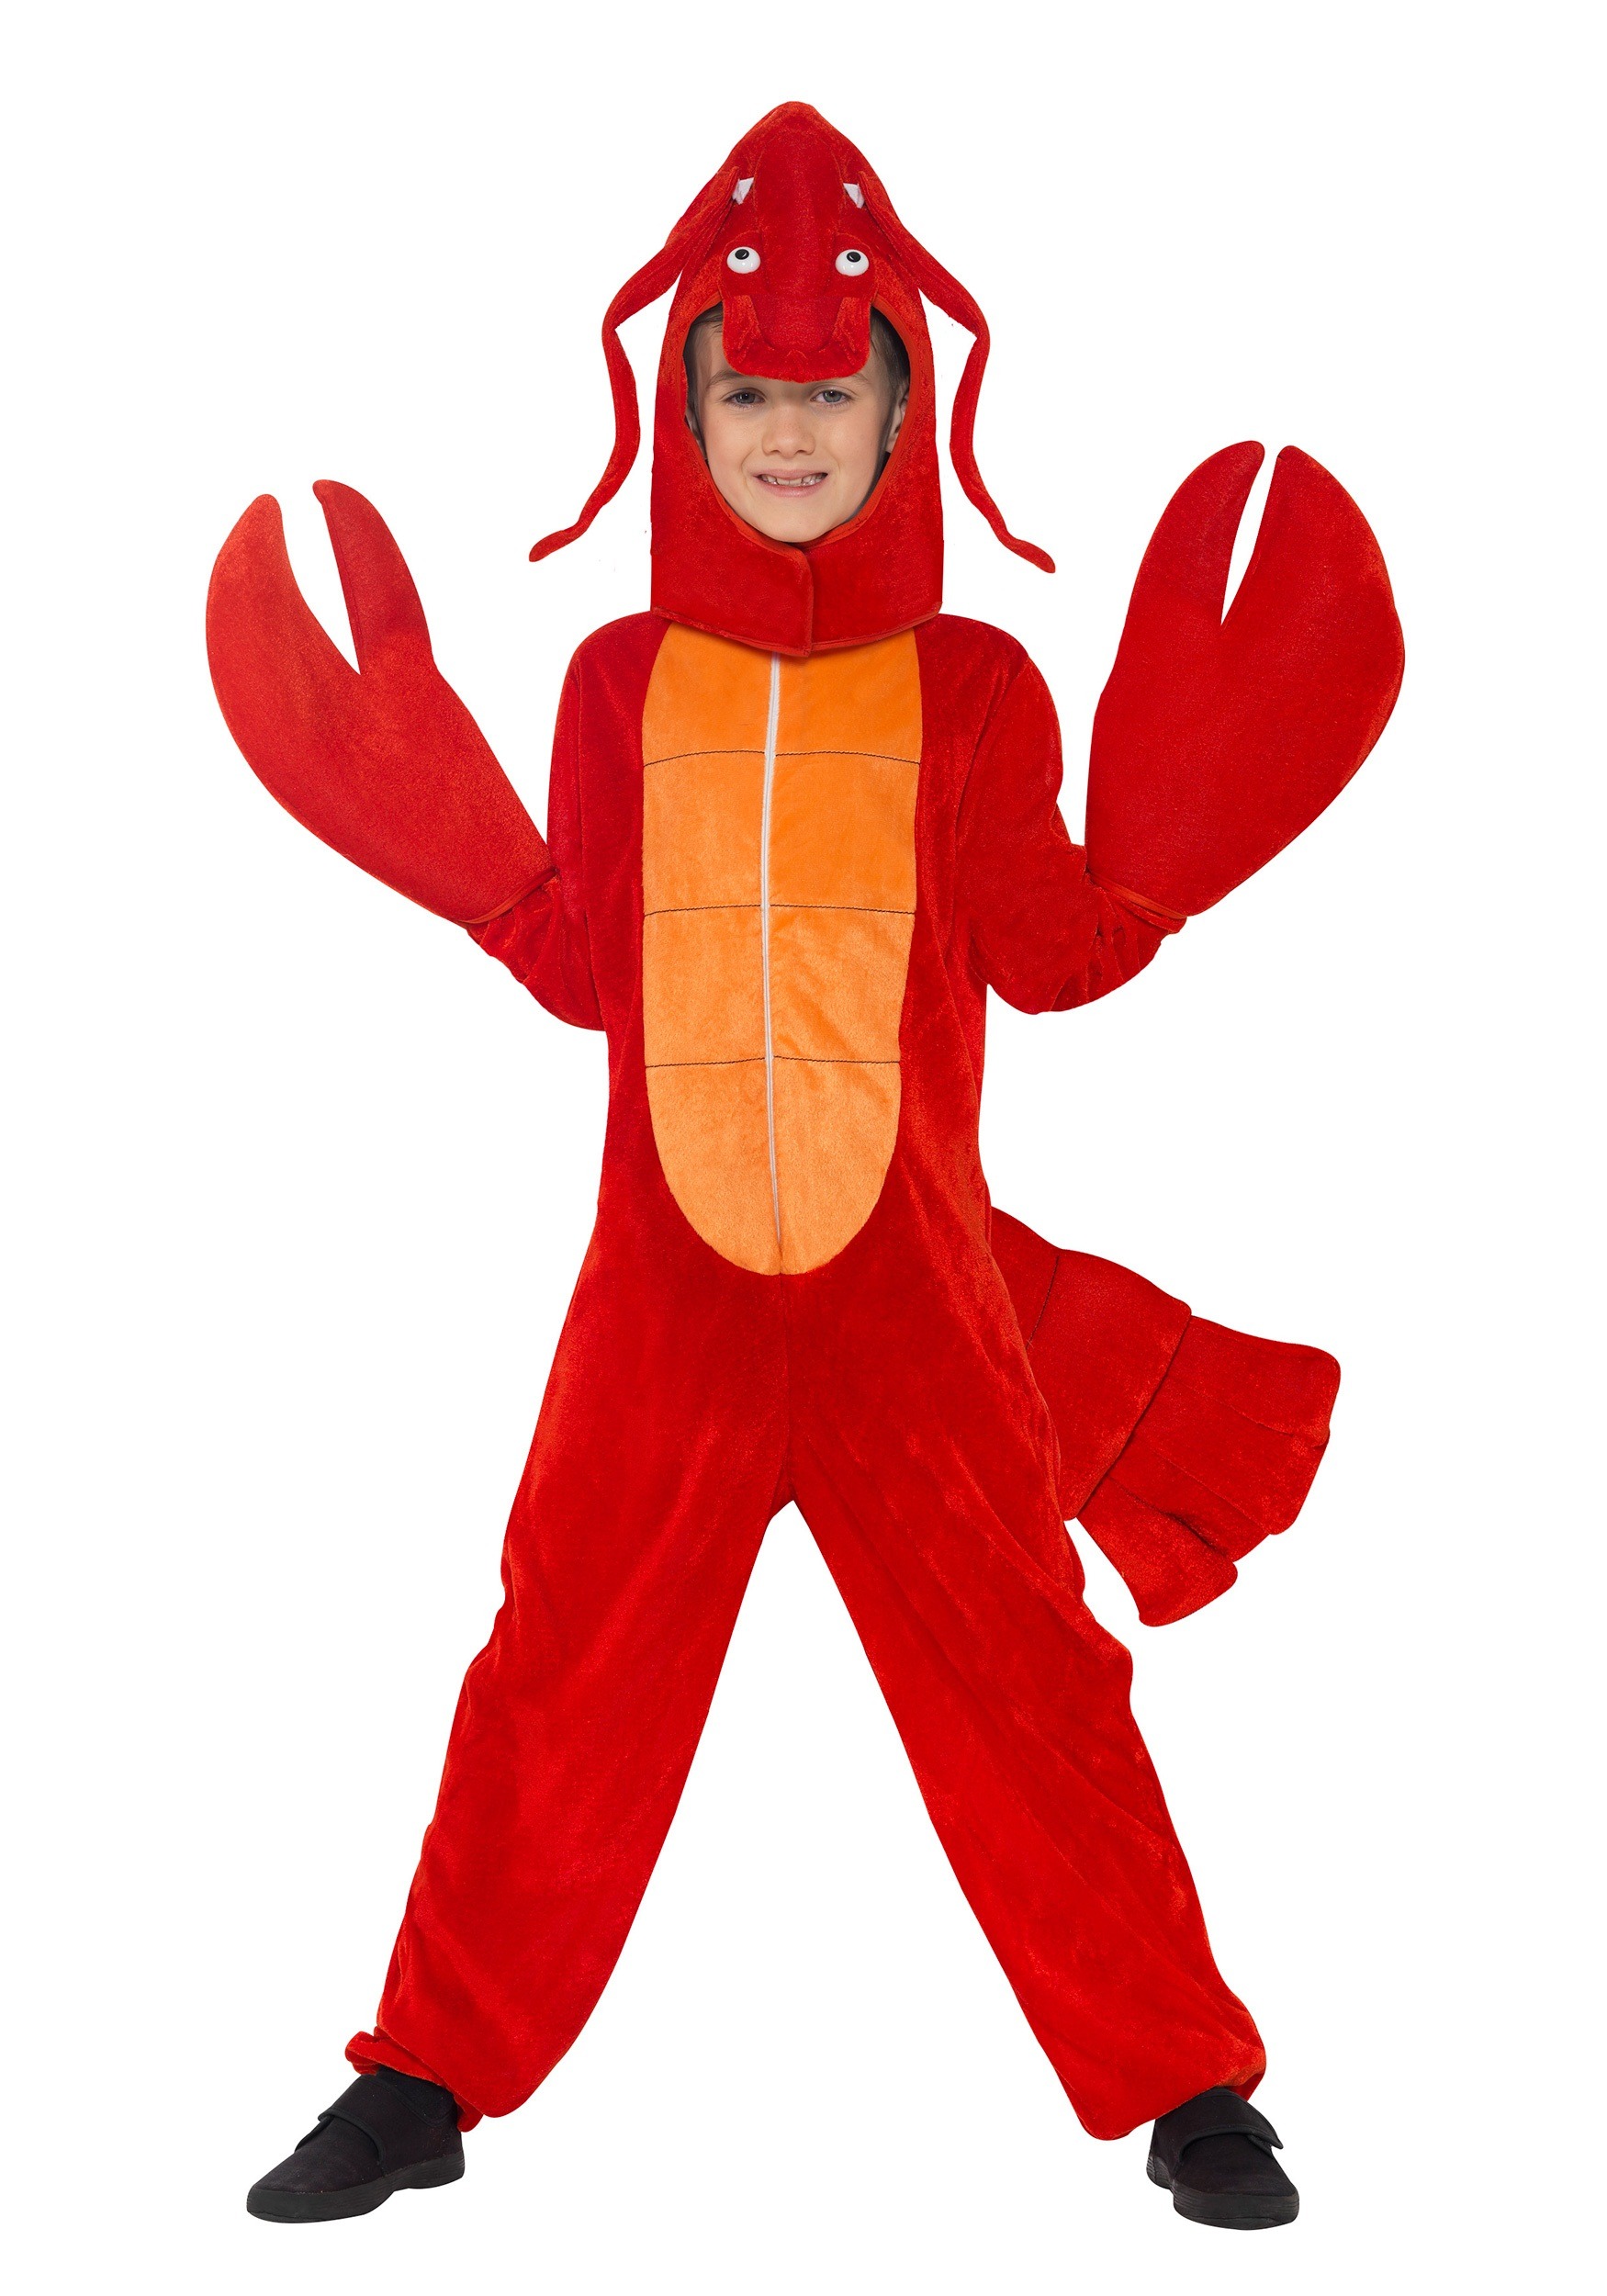 Child's Red Lobster Costume